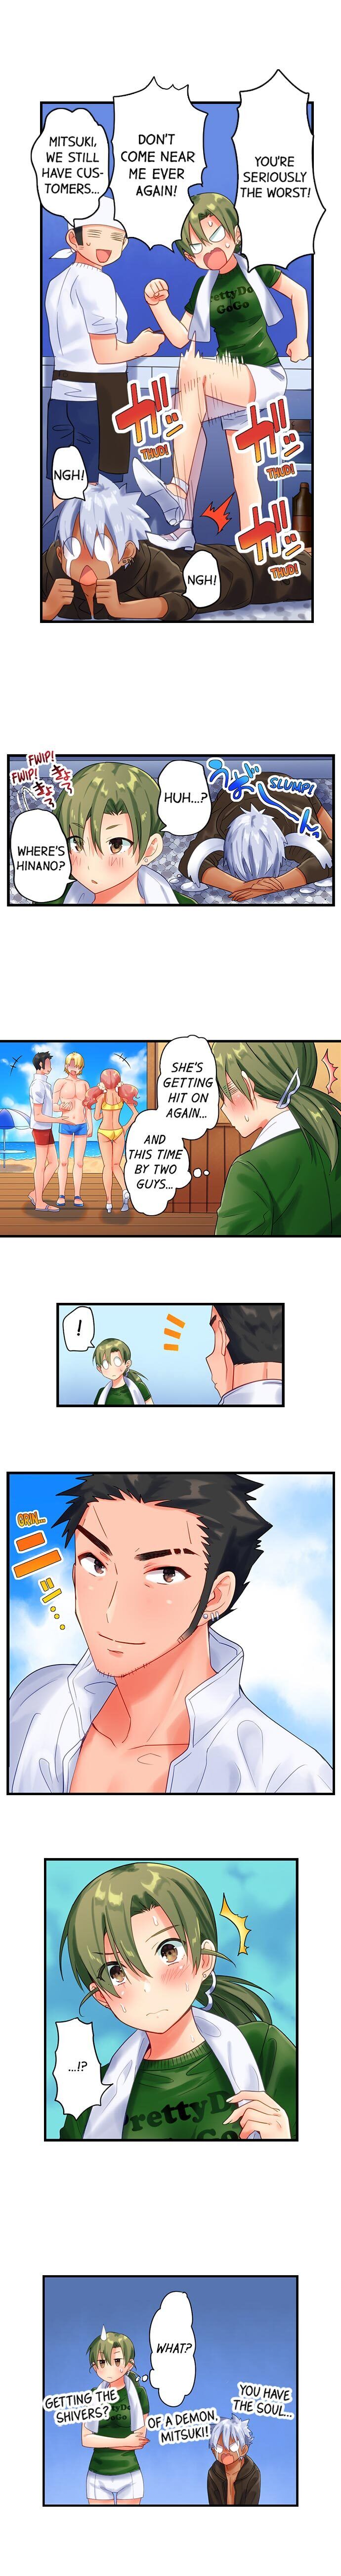 A Chaste Girl’s Climax at a Nudist Beach - Chapter 4 Page 7